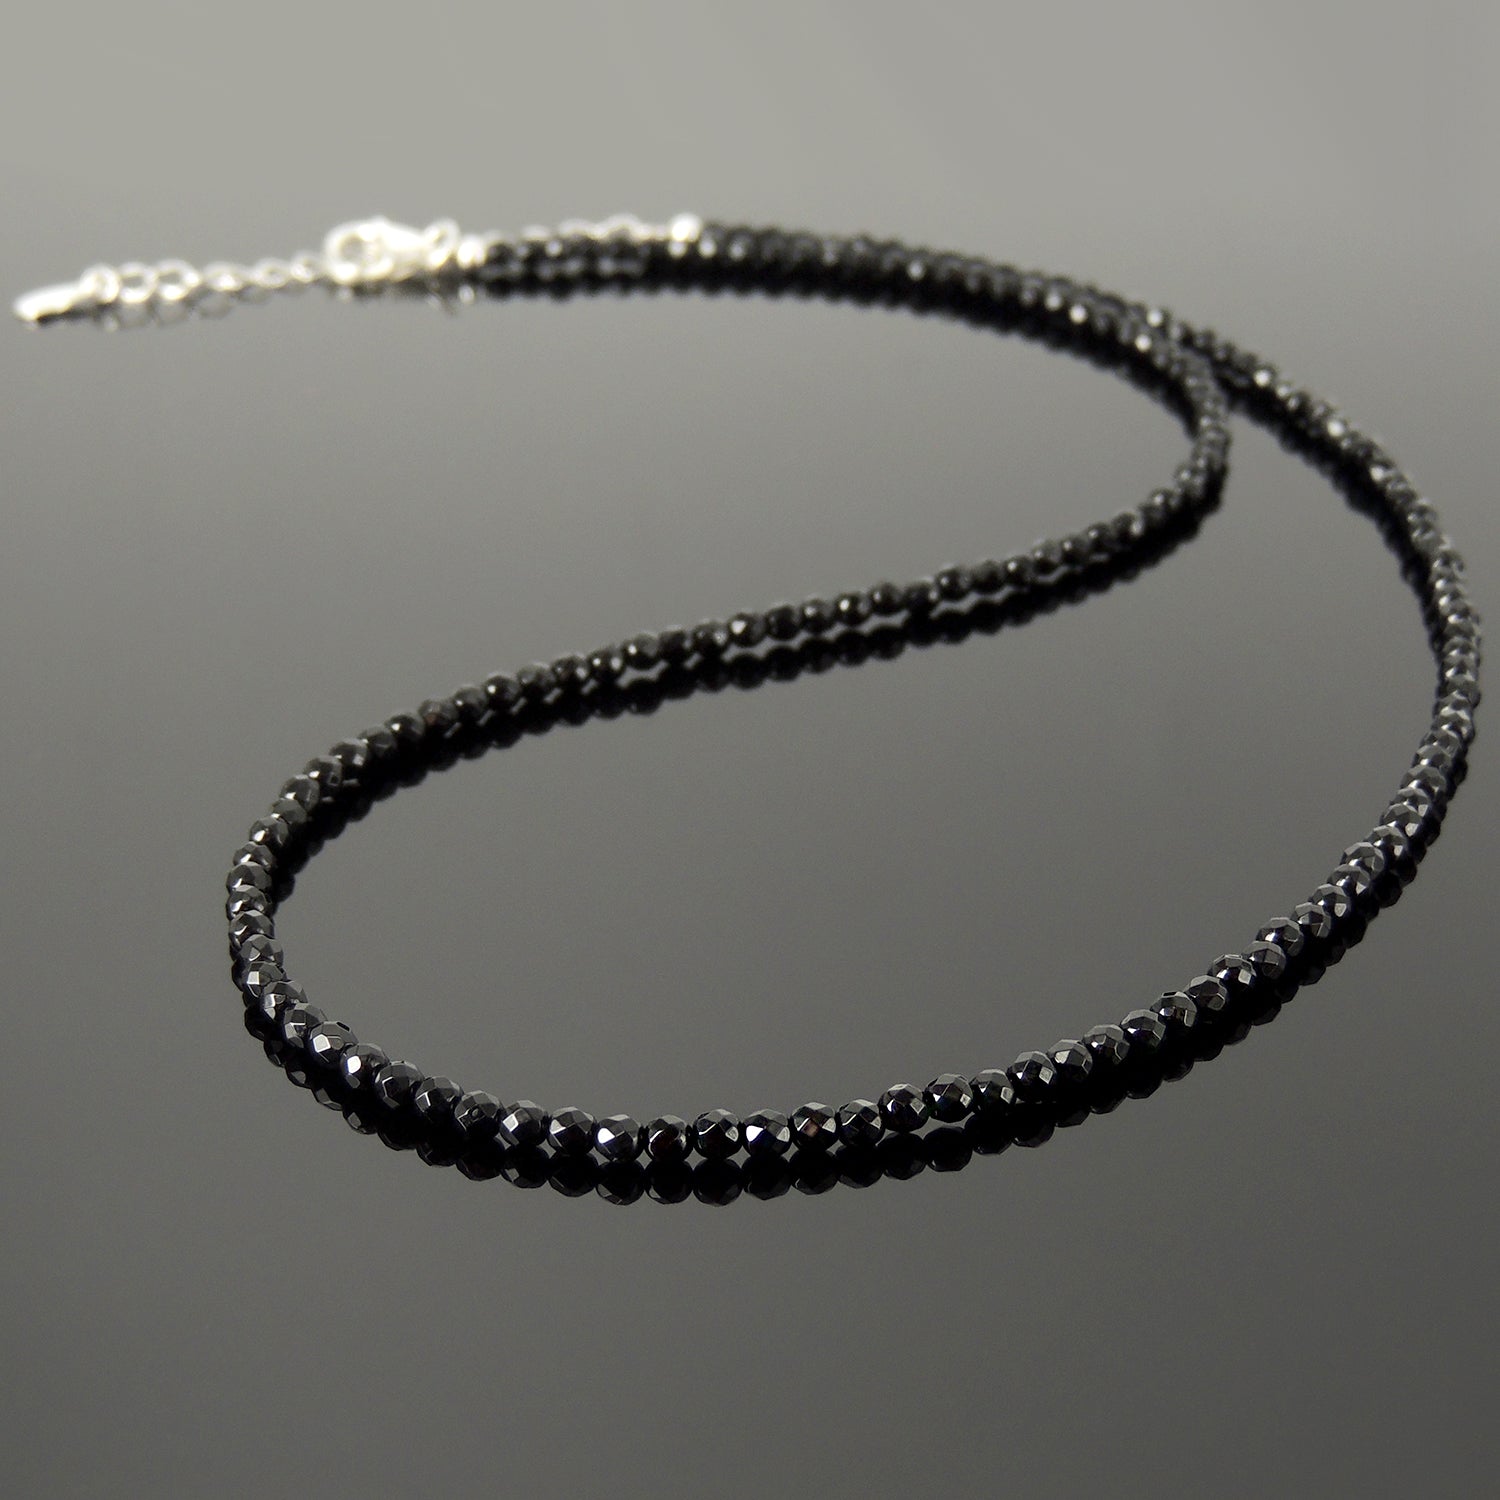 Handmade Adjustable Chain Gemstone Necklace - Men's Women's Casual Wear, Protection with Healing Natural Bright Black Onyx 3mm Faceted Beads, Genuine Non-Plated S925 Sterling Silver Clasp NK254